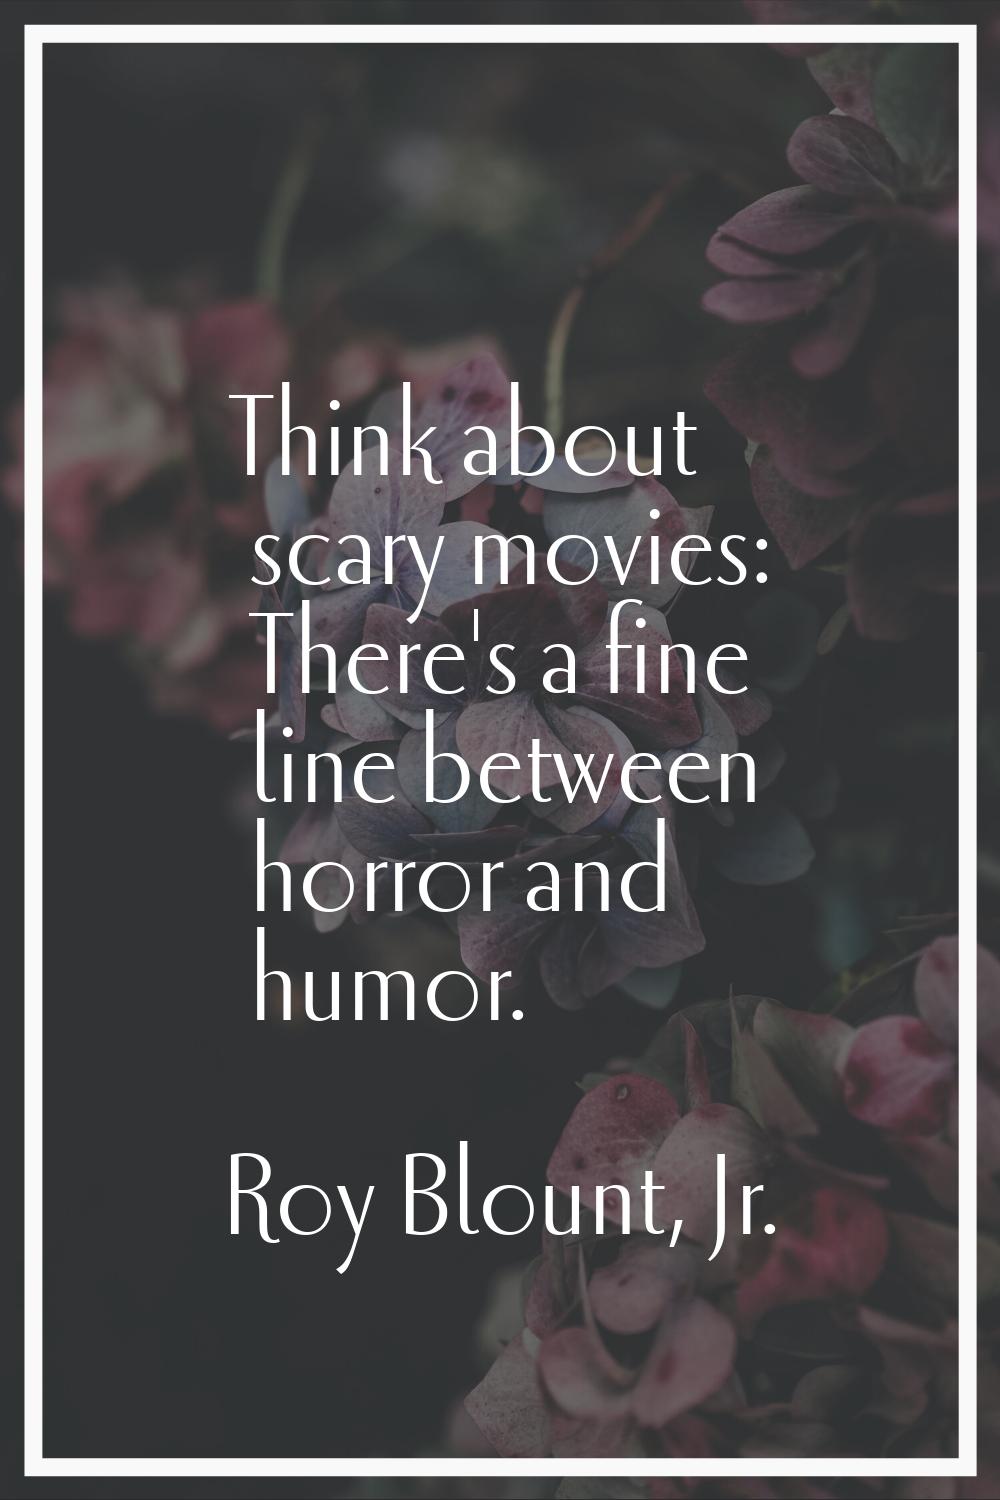 Think about scary movies: There's a fine line between horror and humor.